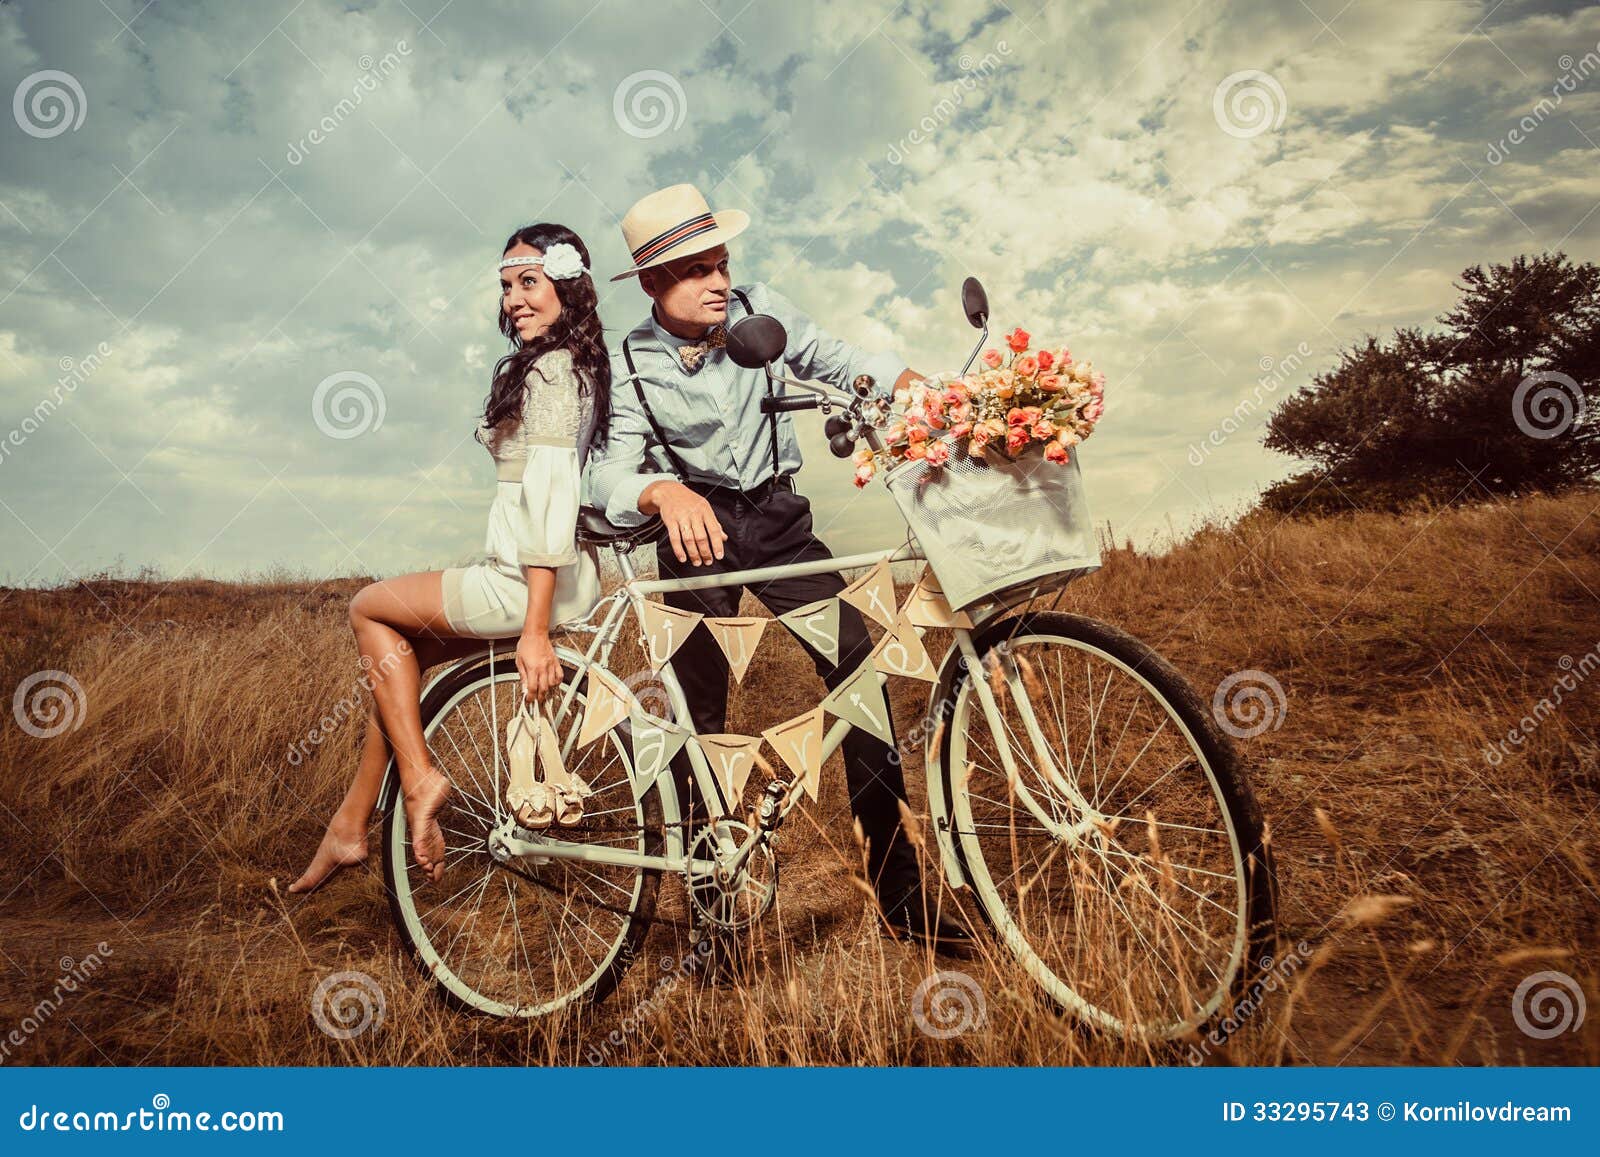 https://thumbs.dreamstime.com/z/vintage-wedding-groom-bride-bicycle-just-married-sign-cans-attached-33295743.jpg?ct=jpeg